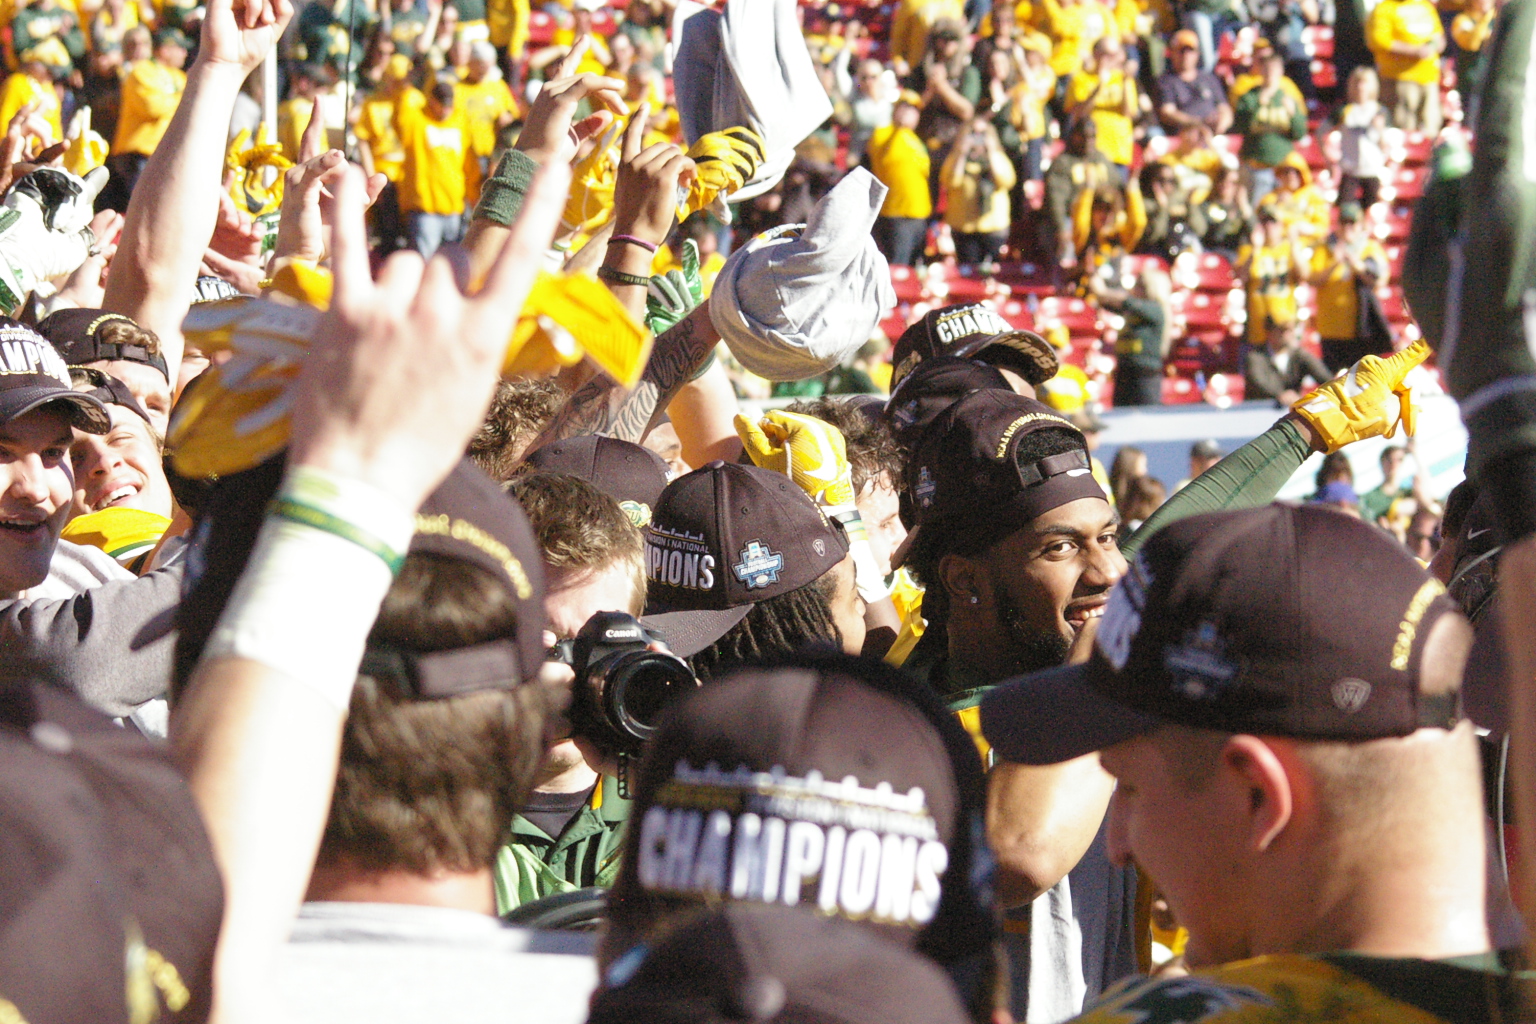 Stairway to Seven: North Dakota State Outpowers Eastern Washington 38-24 To Capture 2018 Division I FCS National Title